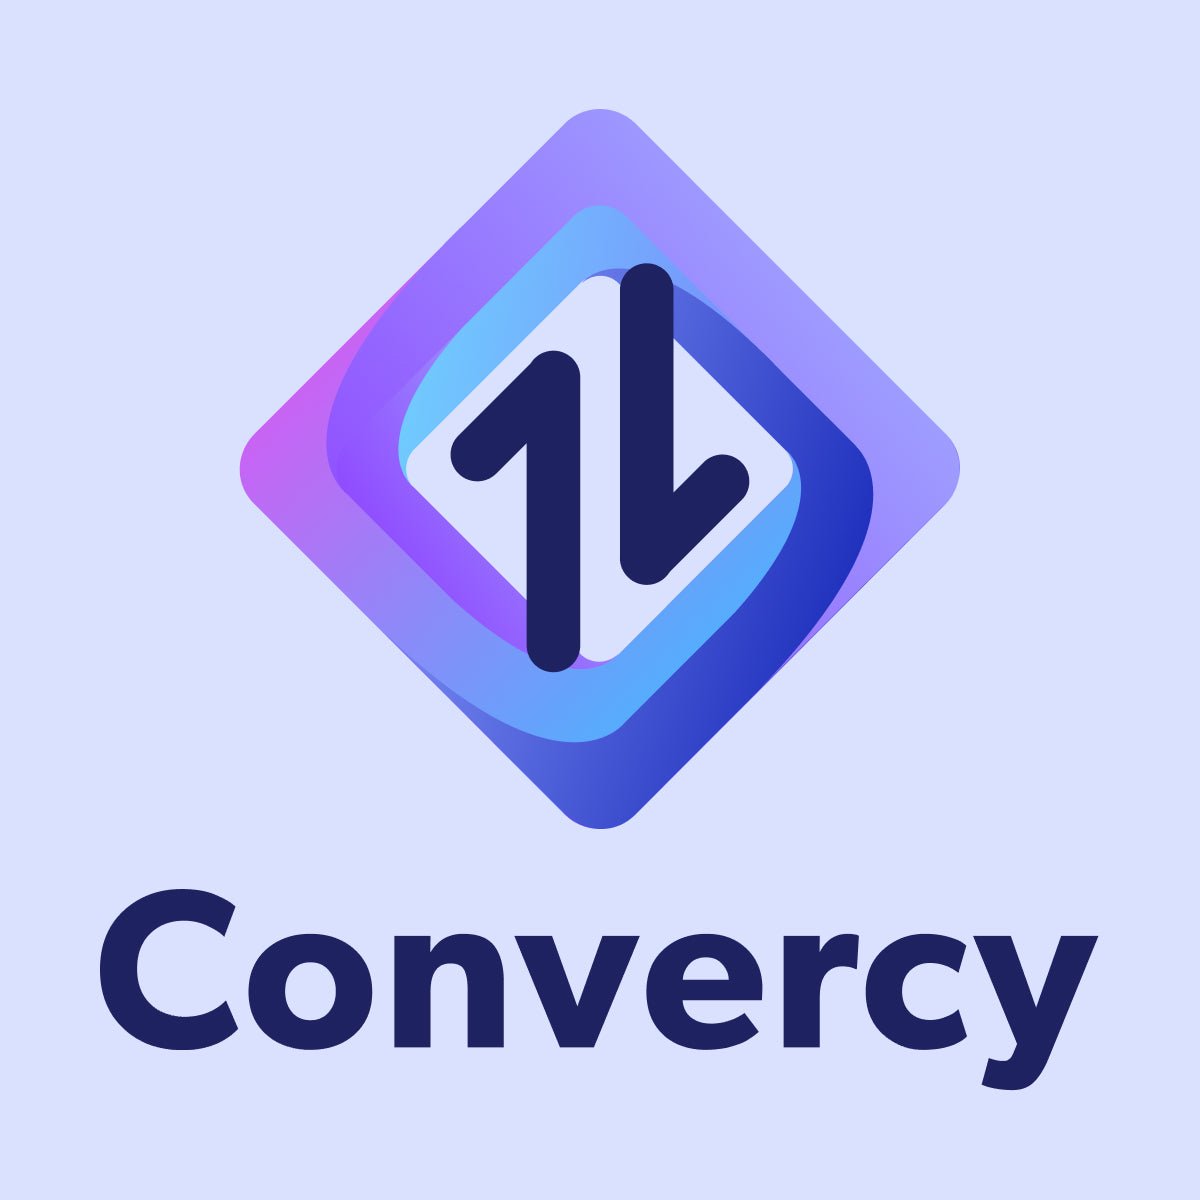 Convercy ‑ Currency Converter